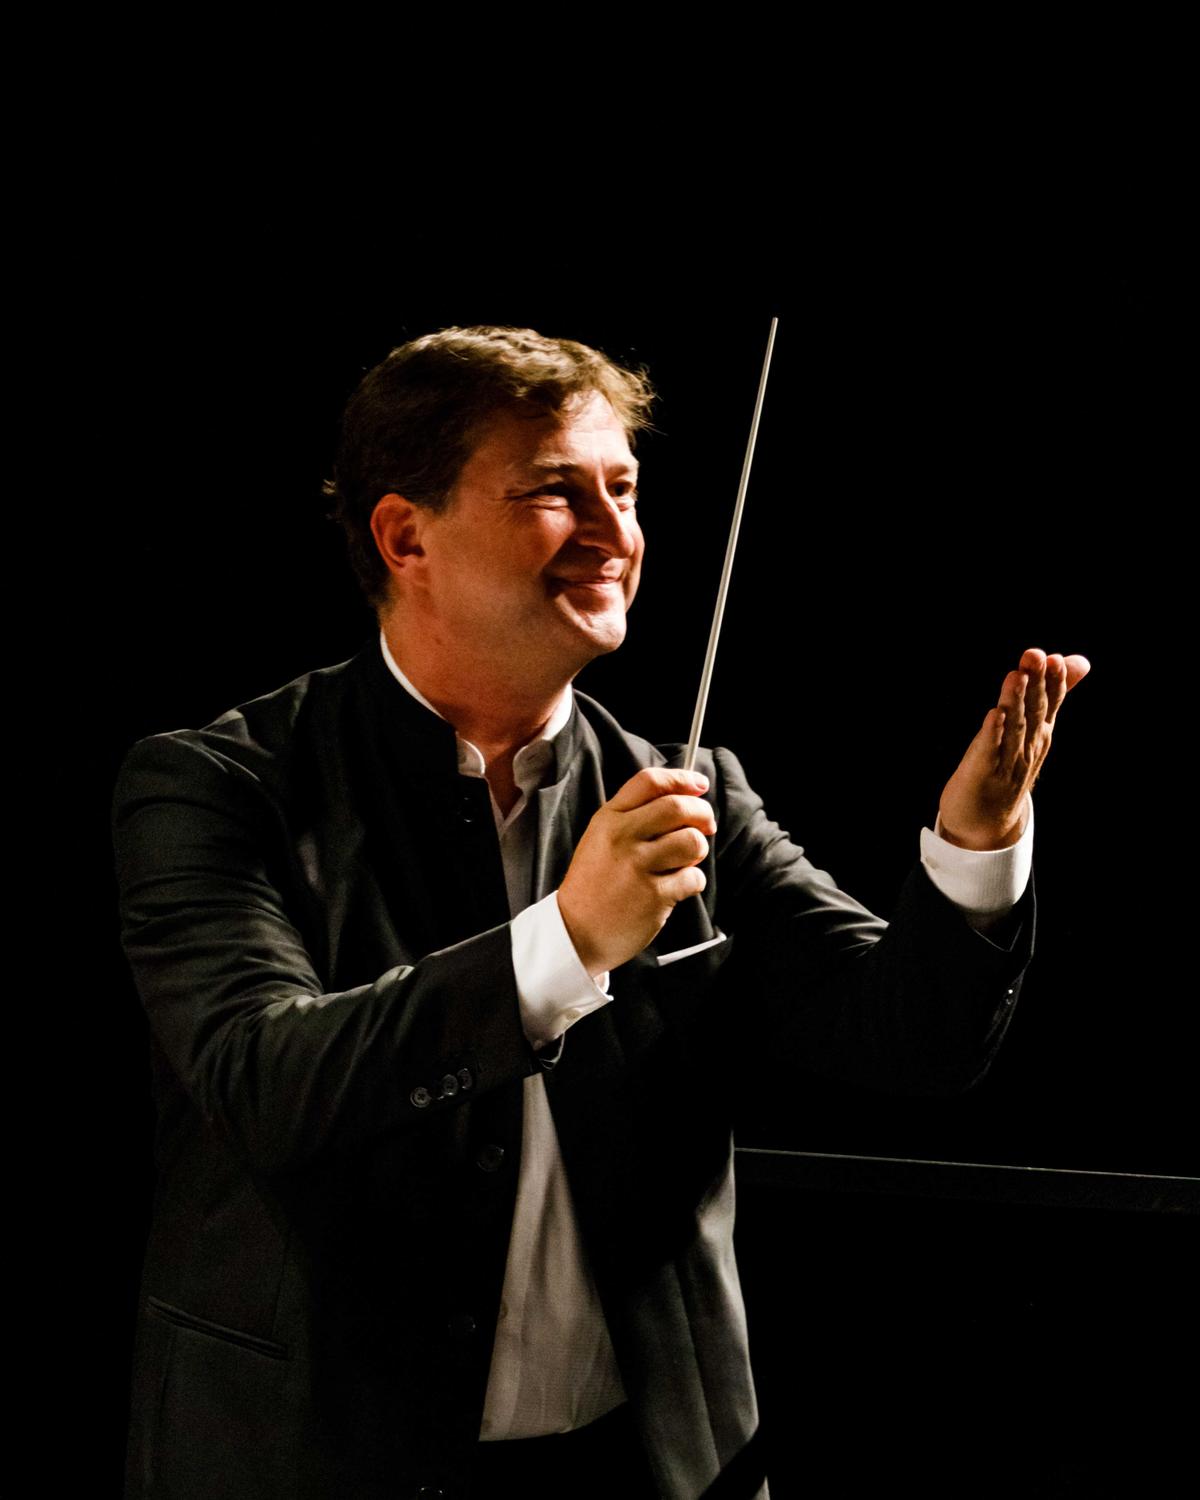 Knut Andreas, artistic director and chief conductor of Piracicaba Symphony Orchestra (OSP). (Courtesy of Piracicaba Symphony Orchestra)